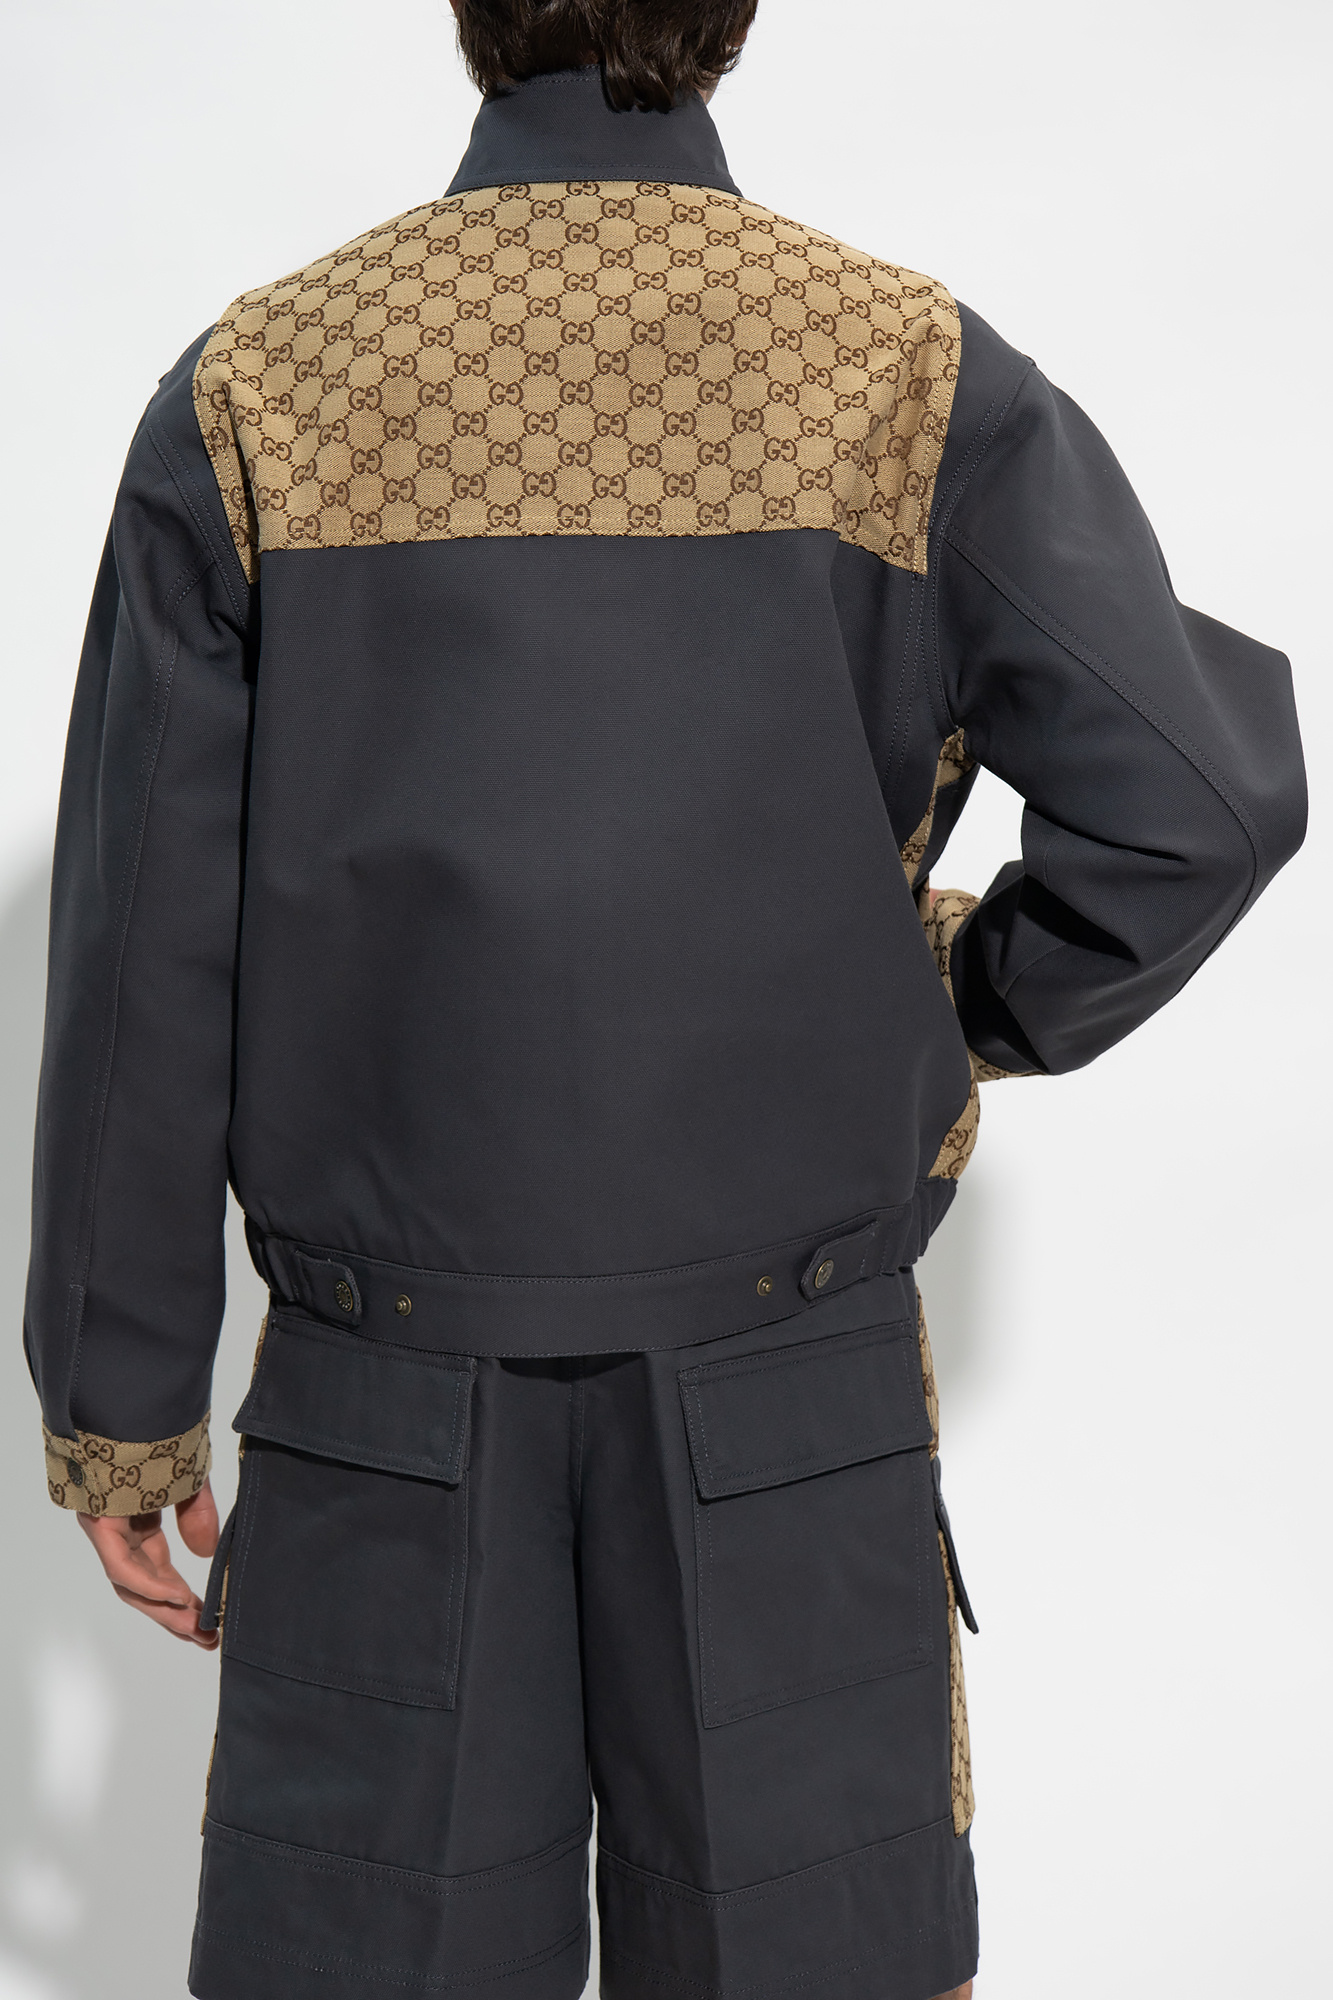 gucci ace Jacket with monogram